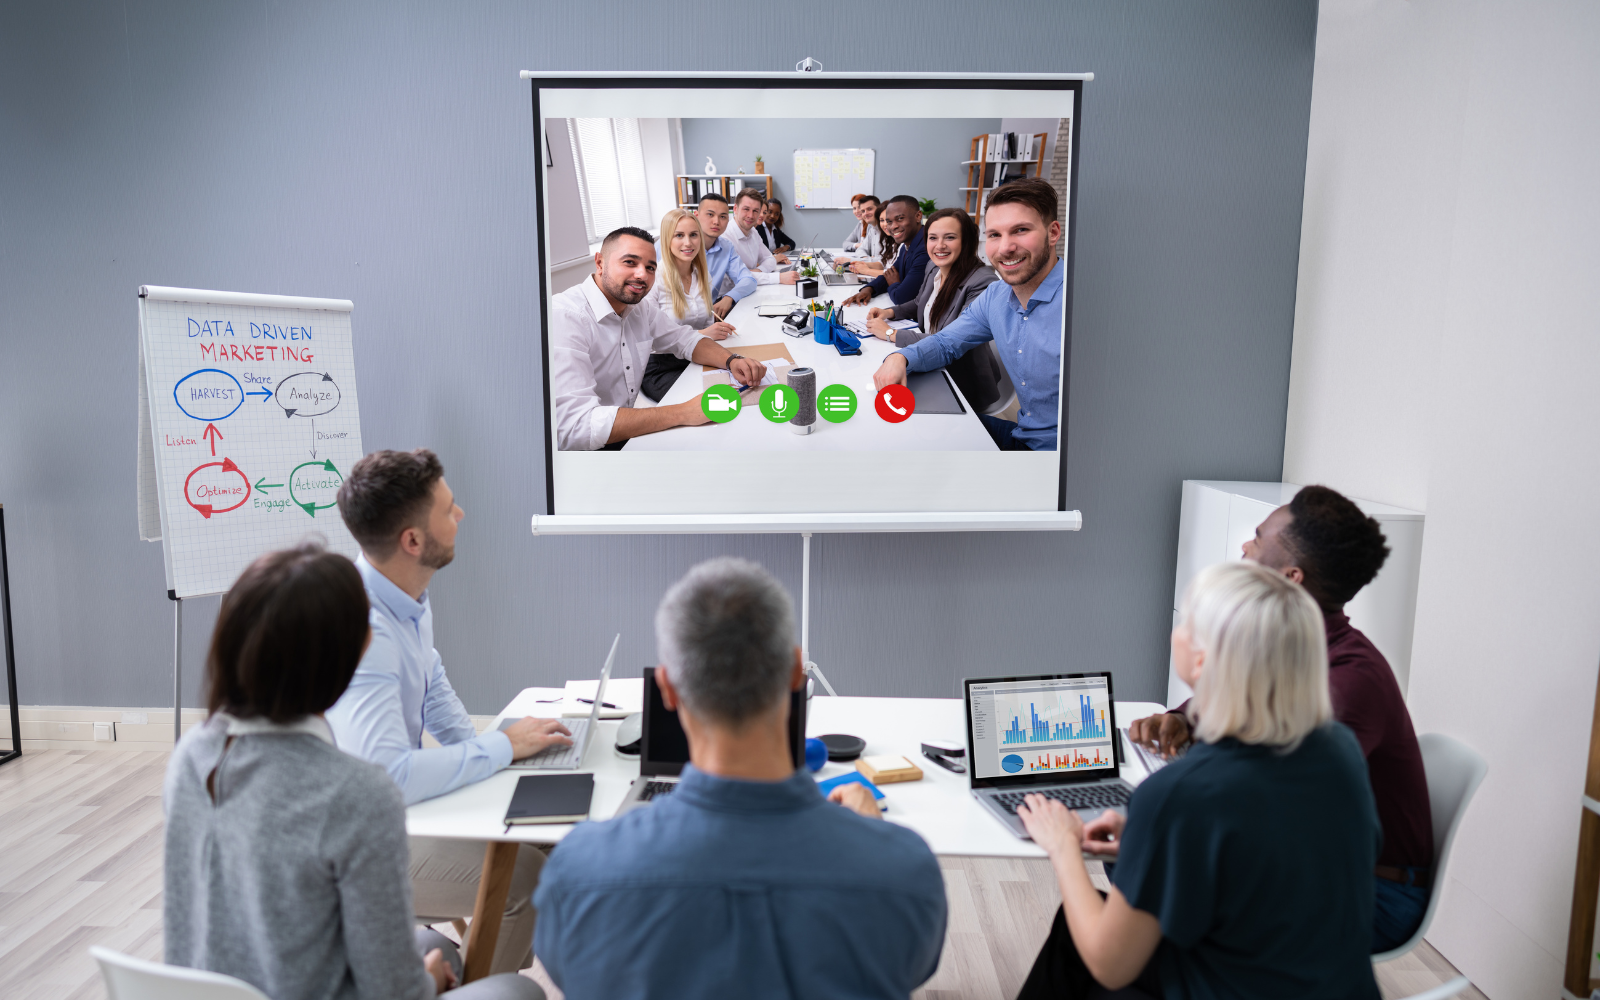 How to Choose Suitable Video Conference Lighting for Different Skin Tones